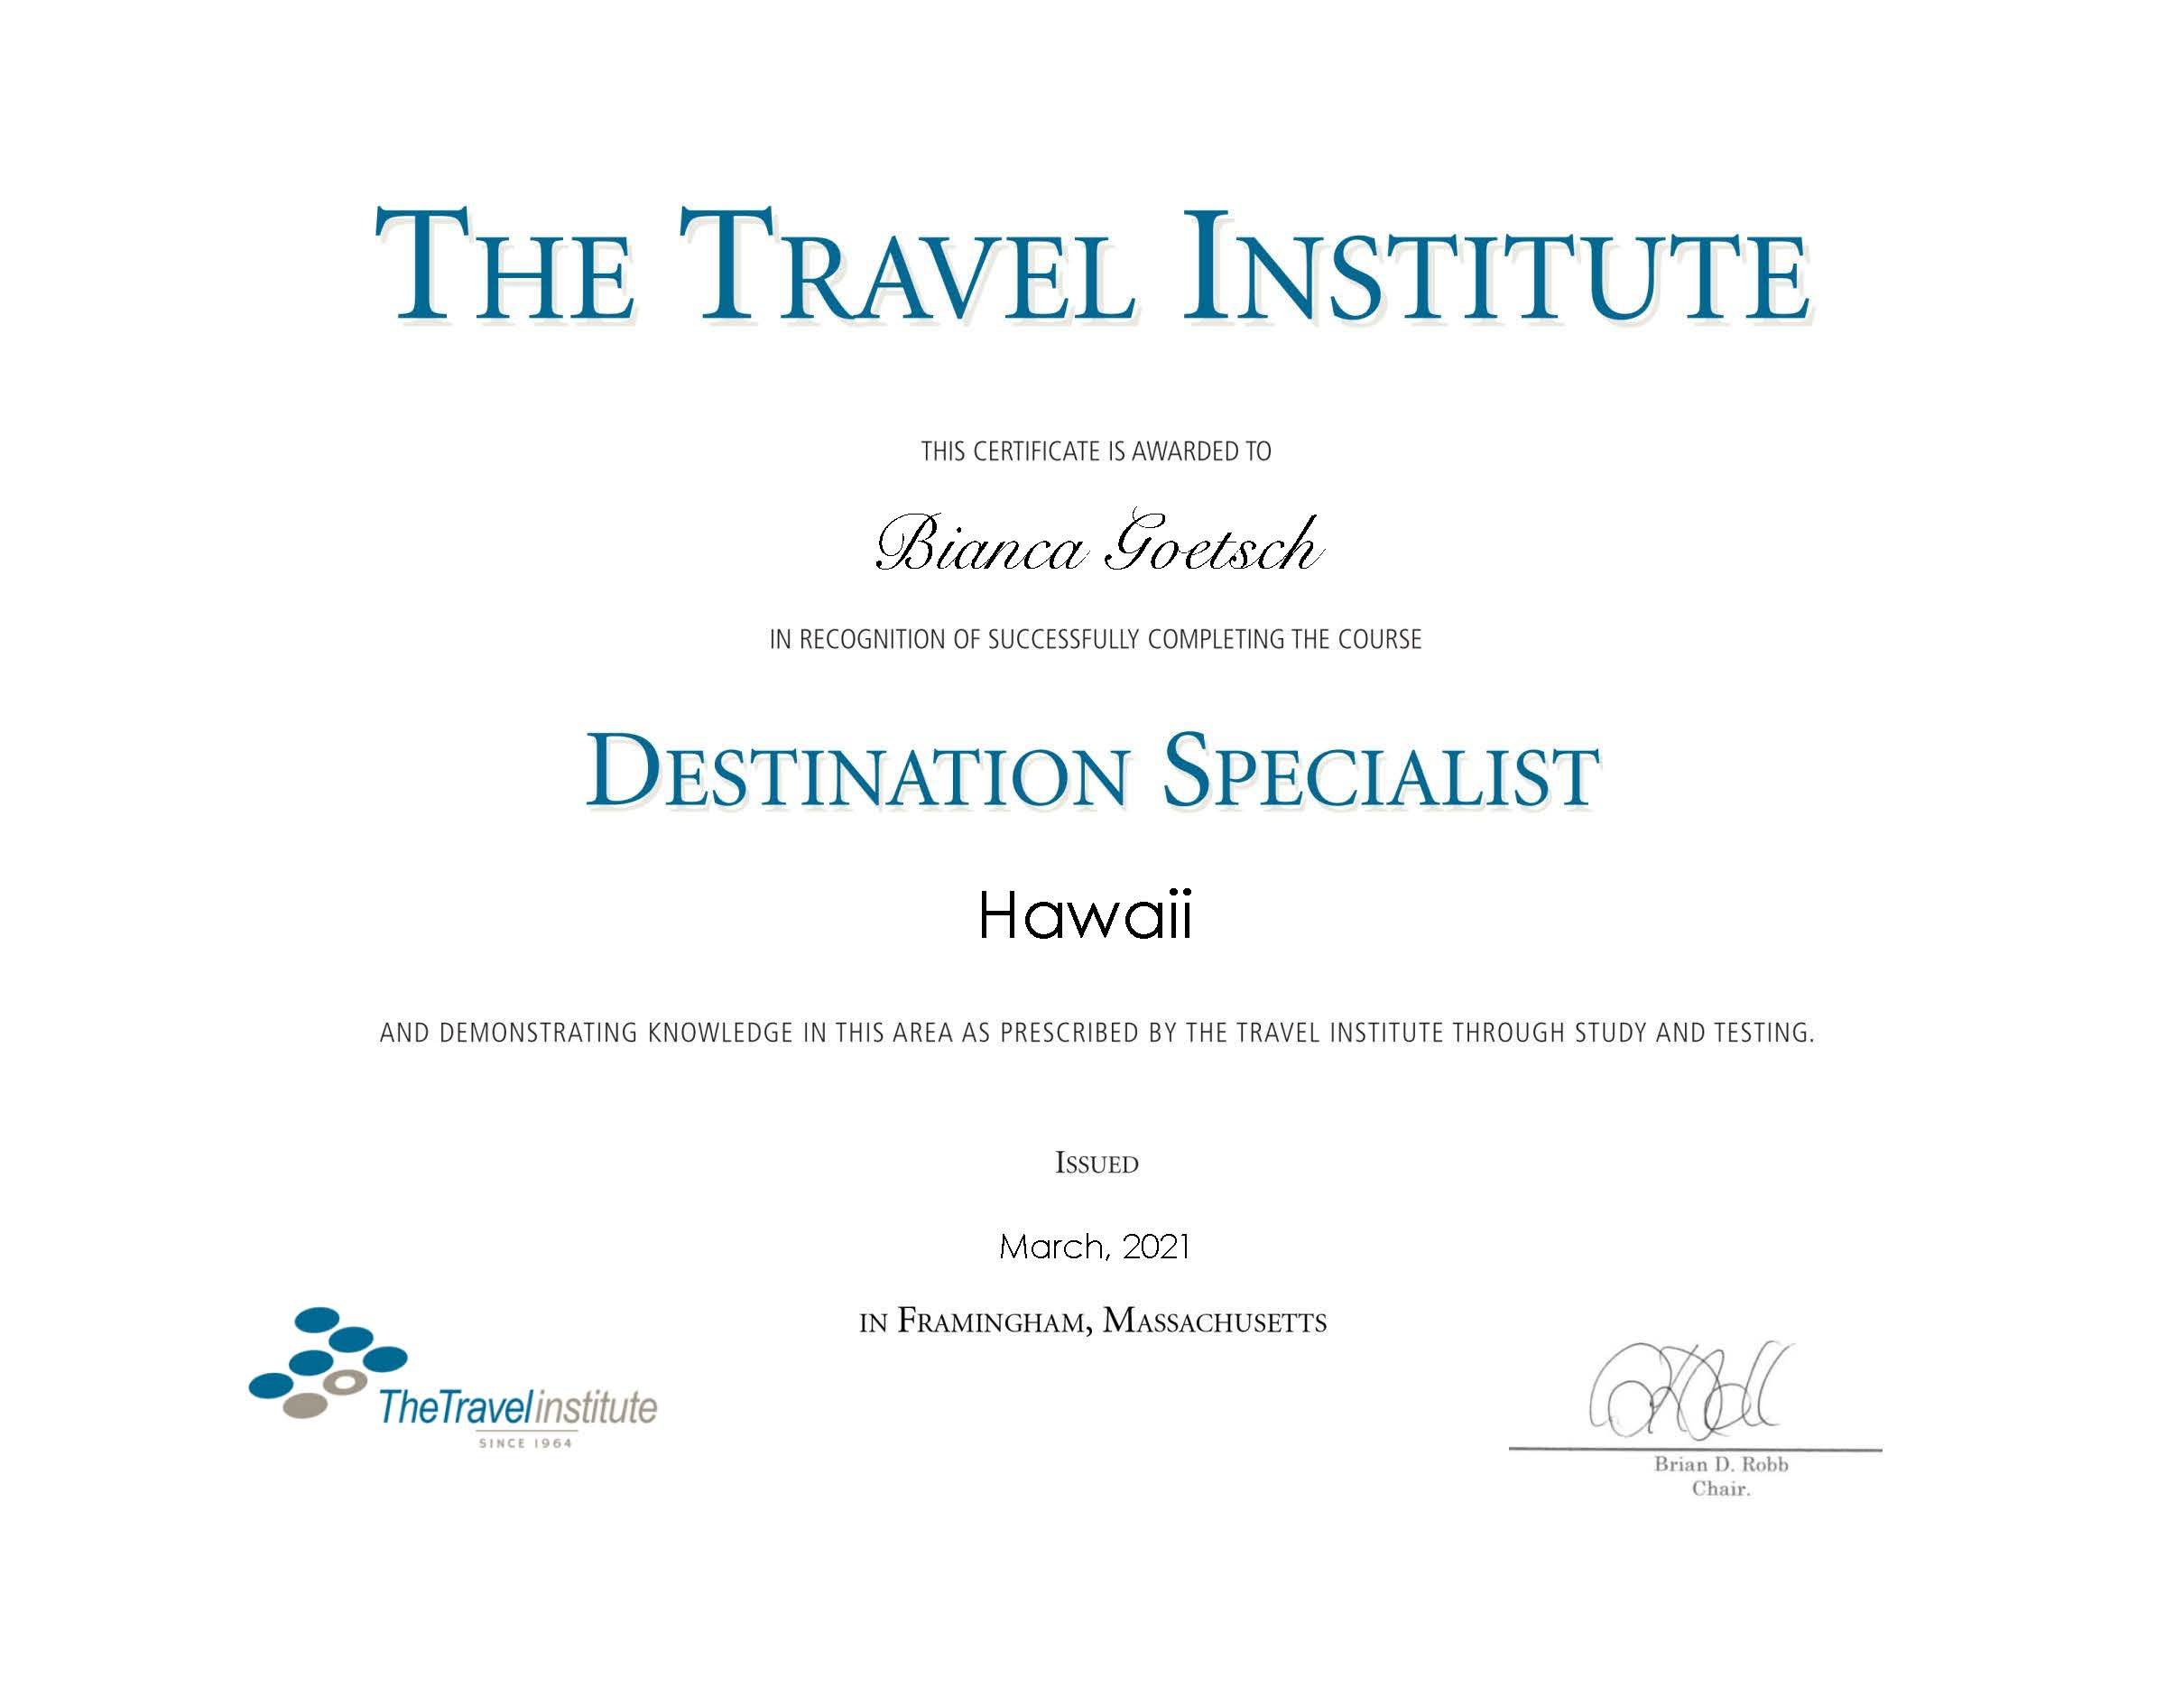  Cruising the Pacific is a Certified Destination Specialist for Hawaii travel vacations 